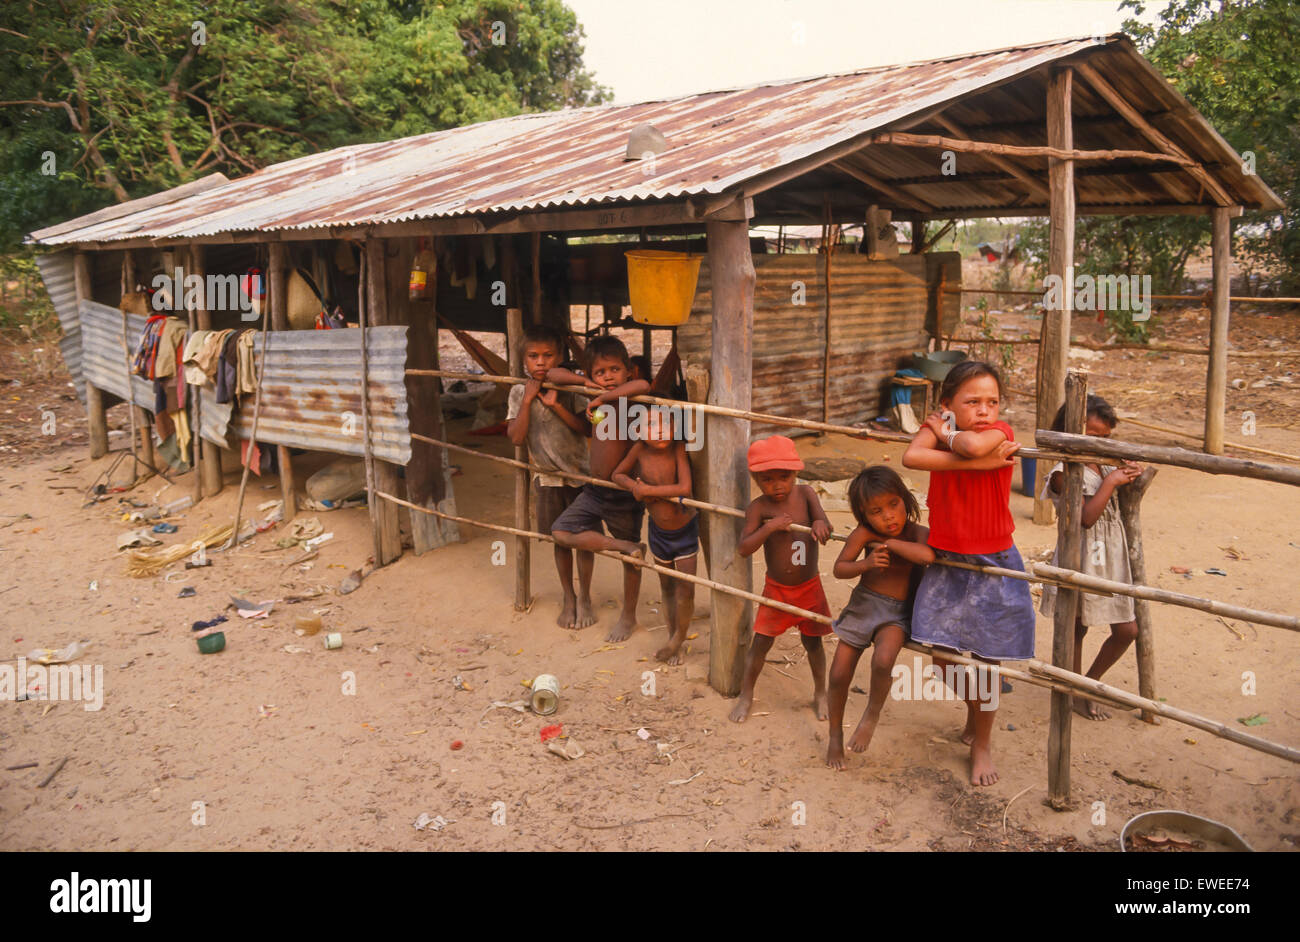 APURE STATE, VENEZUELA - Pume children at their home, at Piedra Azul settlement in Venezuelan llanos, plains. Indigenous Pume people, formerly known as Yaruro people. Stock Photo